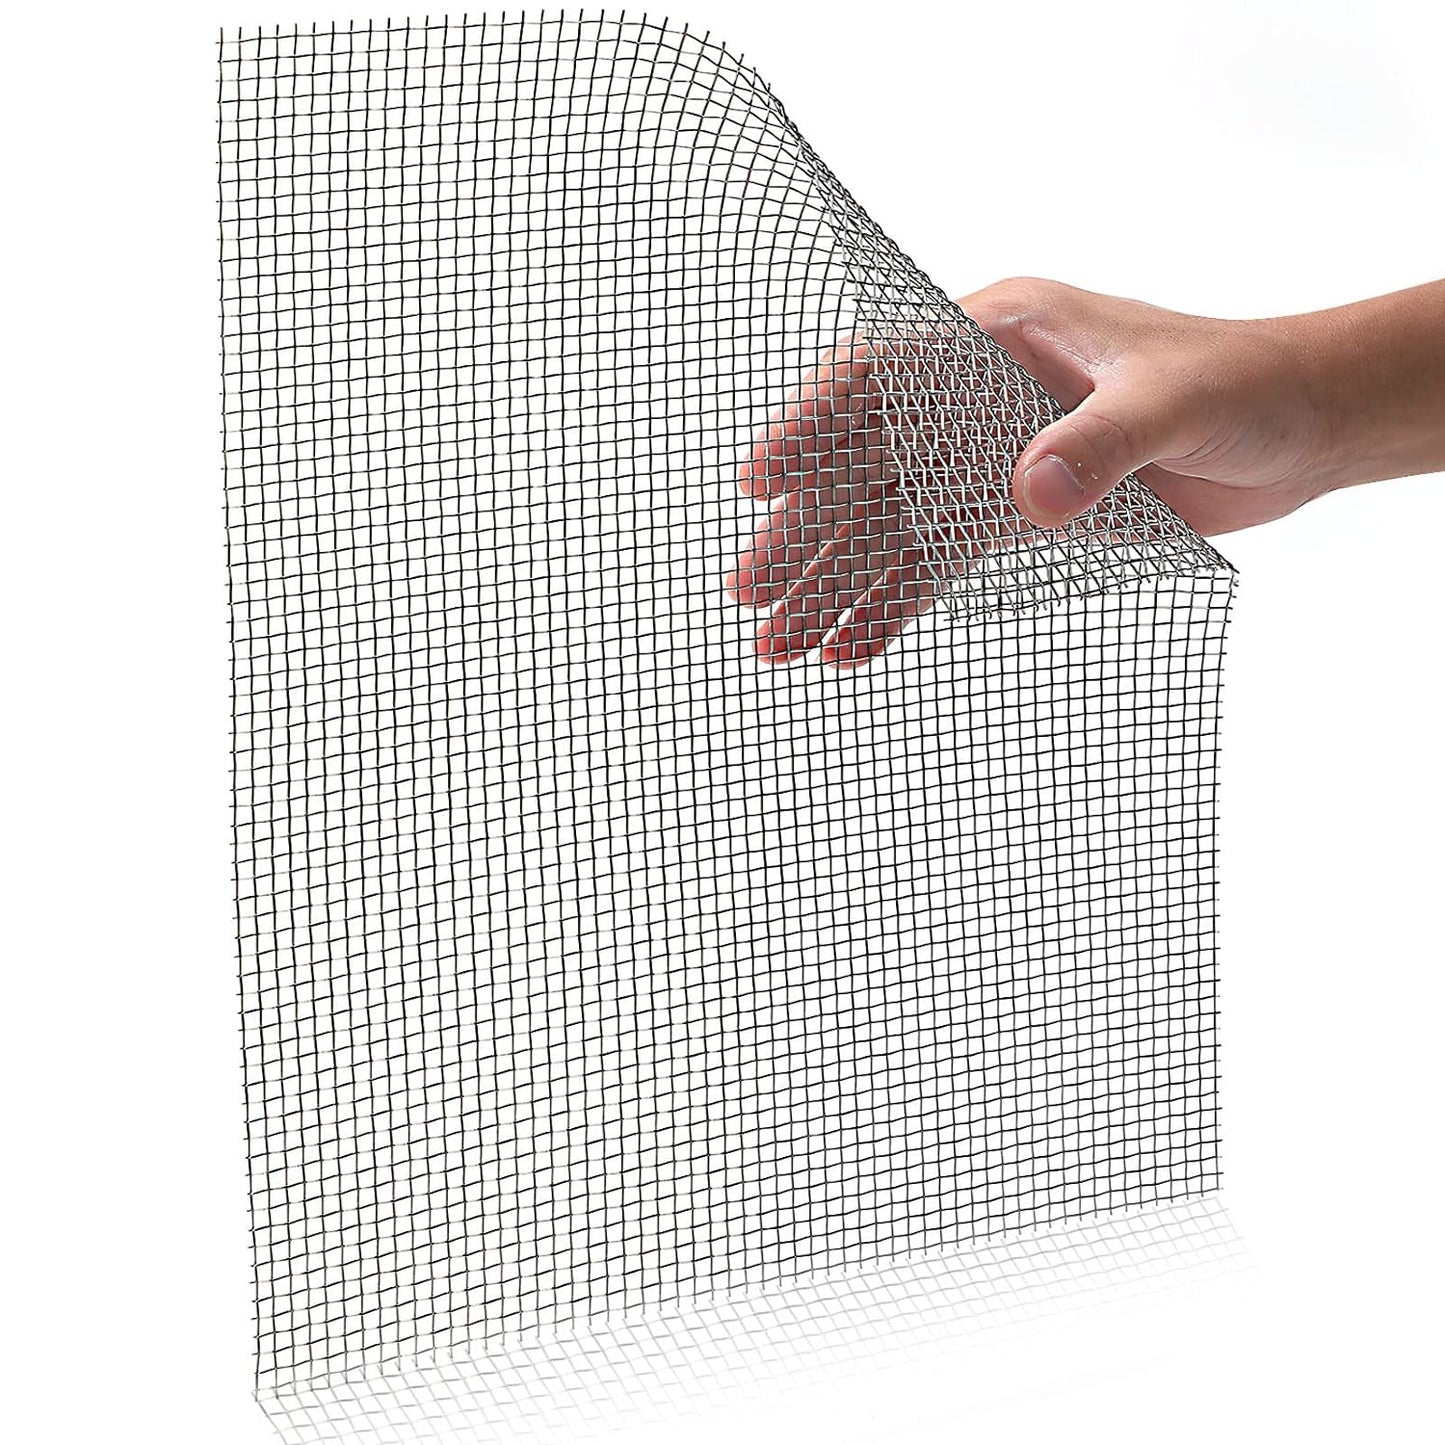 20 Mesh Stainless Steel Mesh Screen 1Pack Woven Wire Mesh 11.3×14.3 Inches (283×363Mm) for Mesh Screen